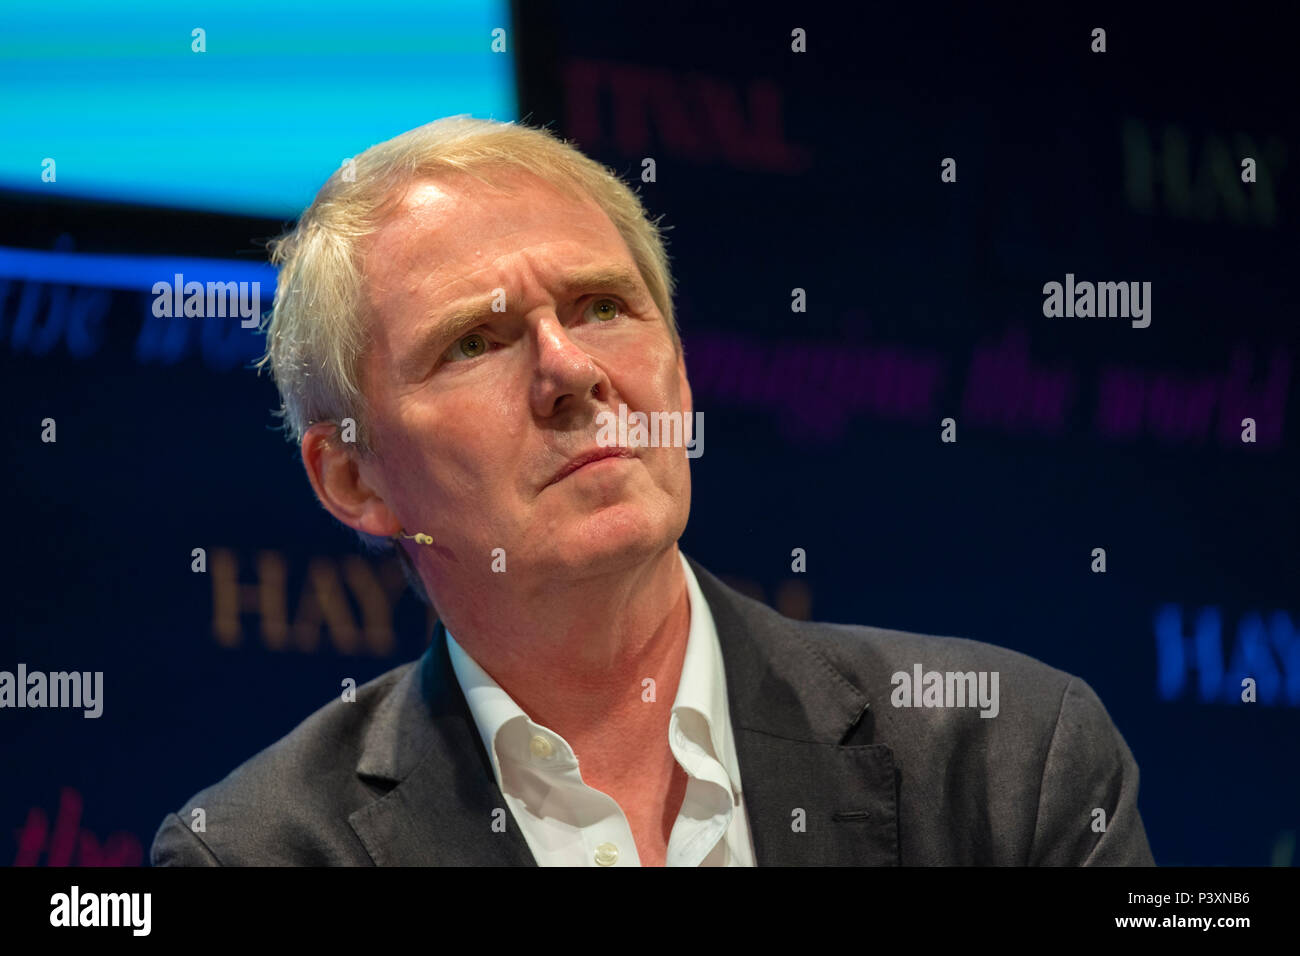 Sir Nigel Richard Shadbolt FRS FREng CITP CEng FBCS CPsychol Principal of Jesus College, Oxford, and Professorial Research Fellow in the Department of Computer Science, University of Oxford.  Author of 'The Digital Ape' . Pictured speaking at the 2018 Hay Festival of Literature and the Arts.  The annual festival  in the small town of Hay on Wye on the Welsh borders , attracts  writers and thinkers from across the globe for 10 days of celebrations of the best of the written word, political though  and literary debate Stock Photo